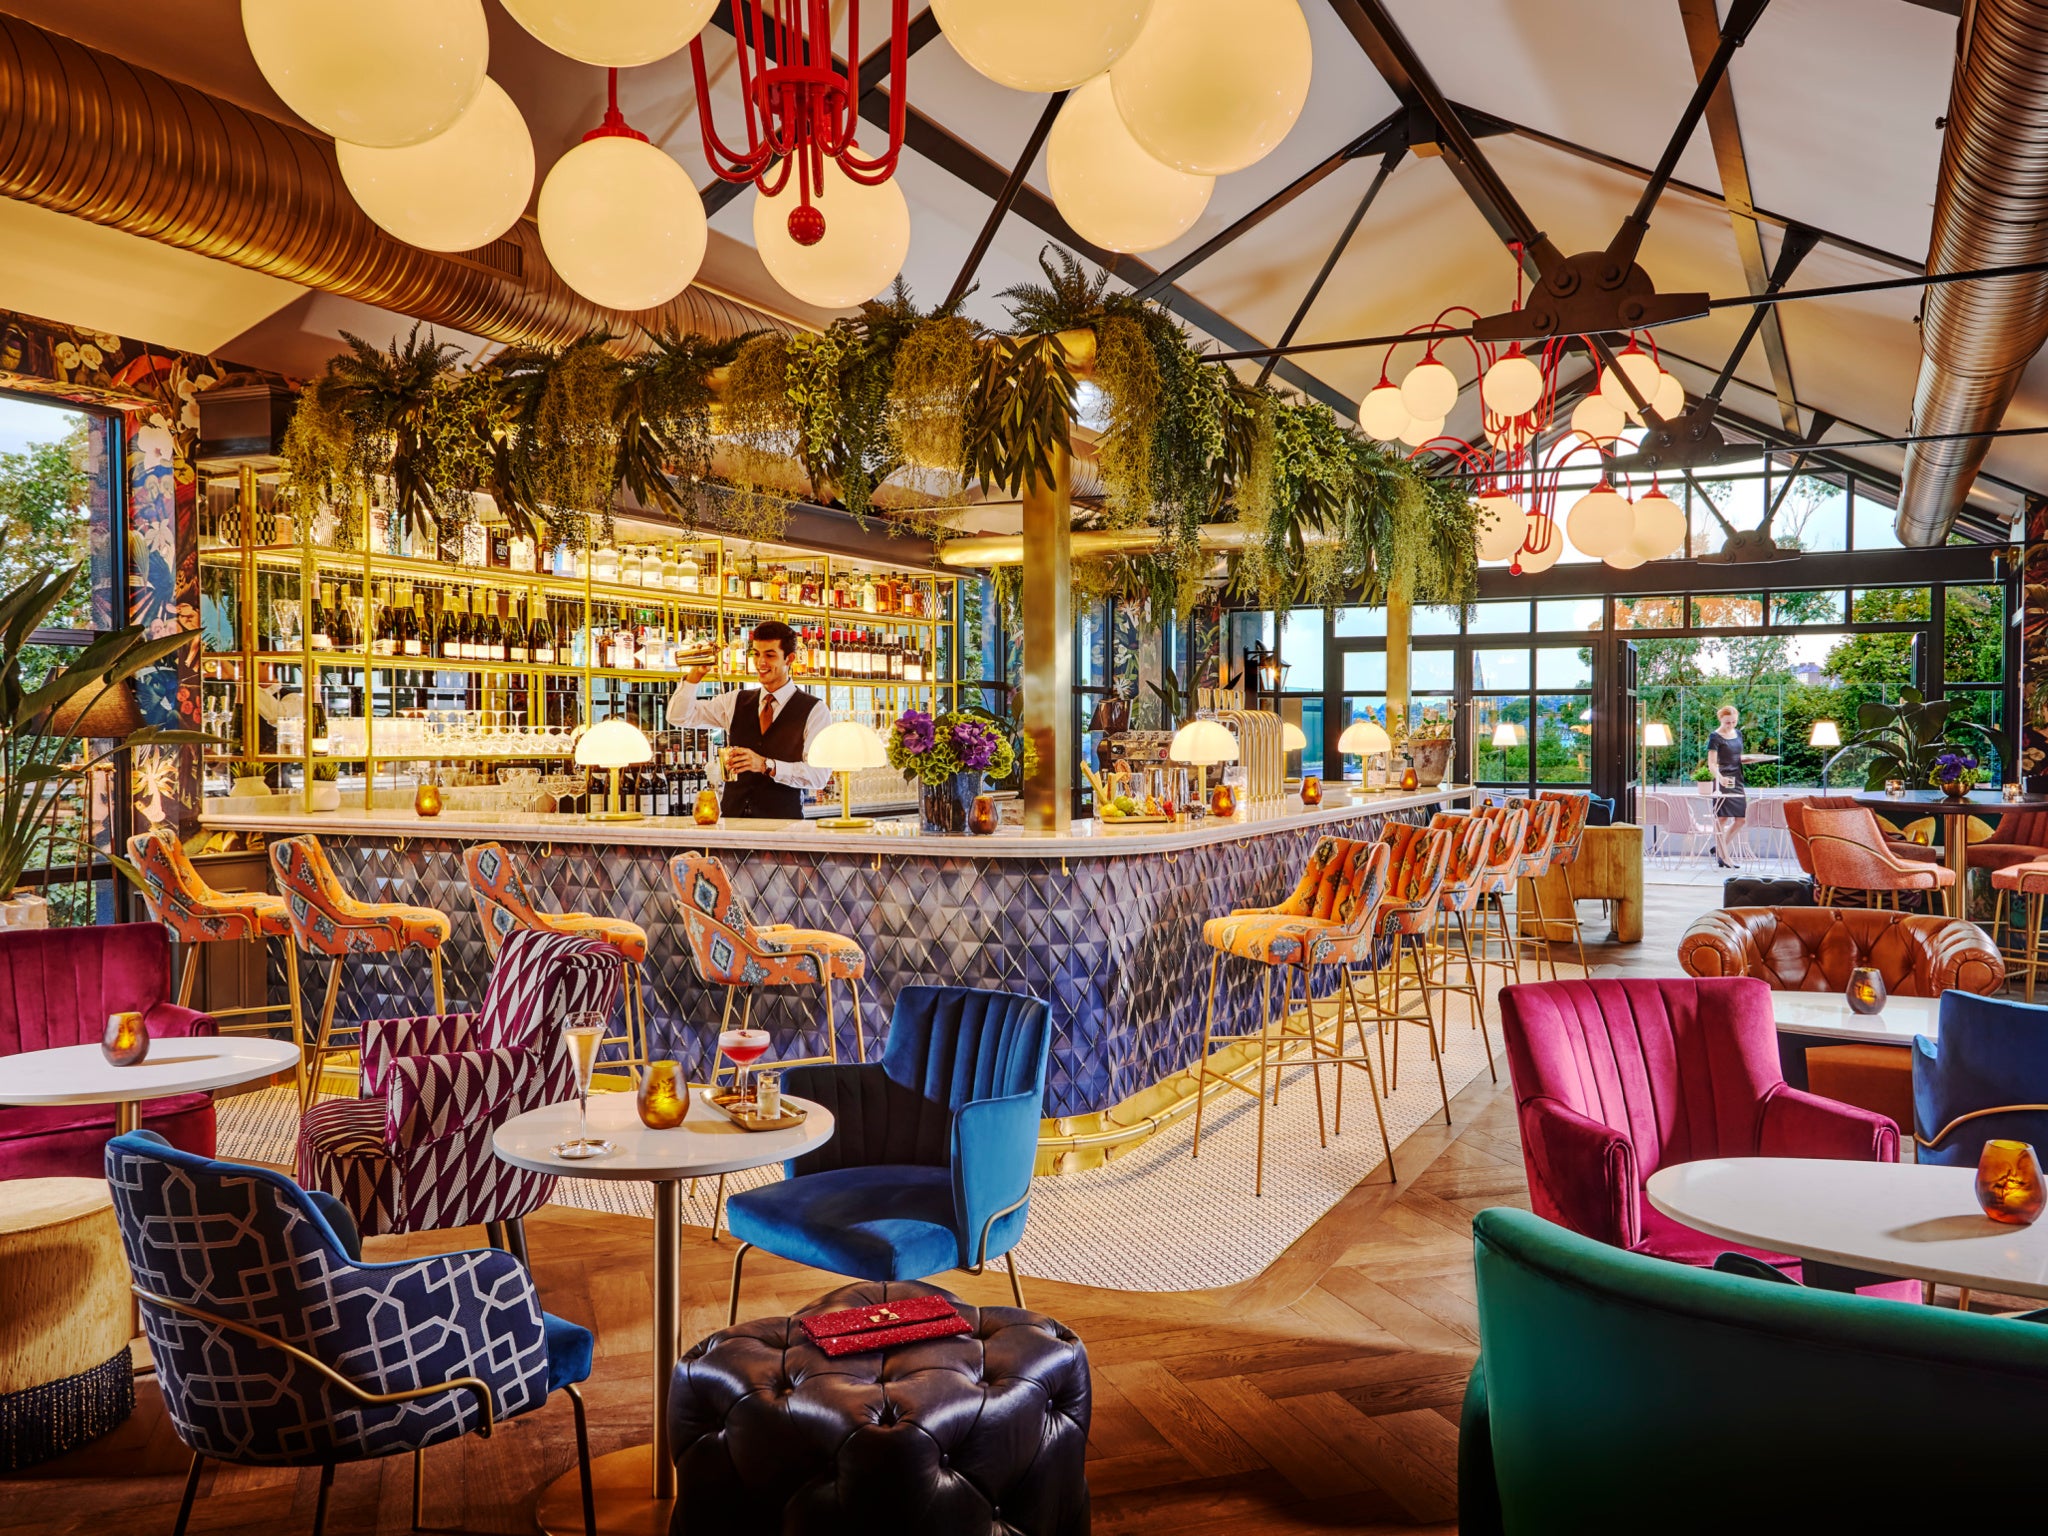 The Glasshouse Bar in The Montenott is a chic Cork hangout